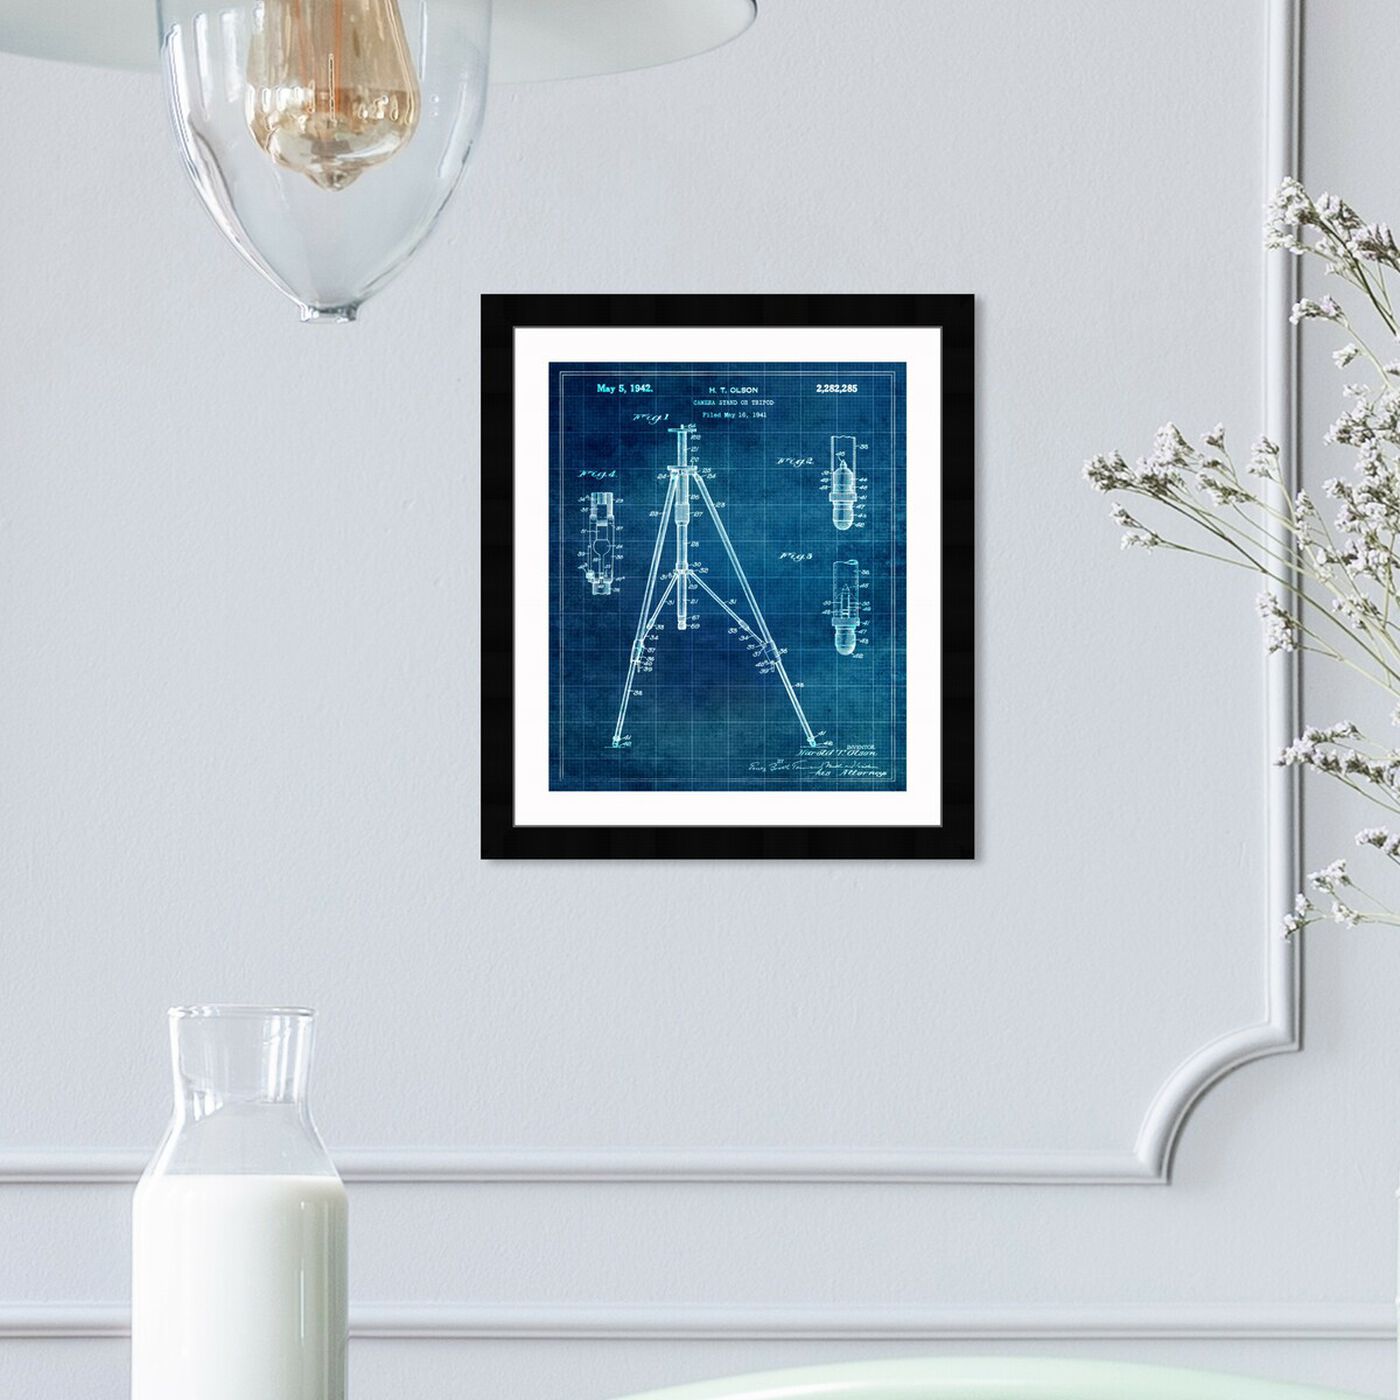 Hanging view of Tripod 1942 I featuring entertainment and hobbies and photography art.